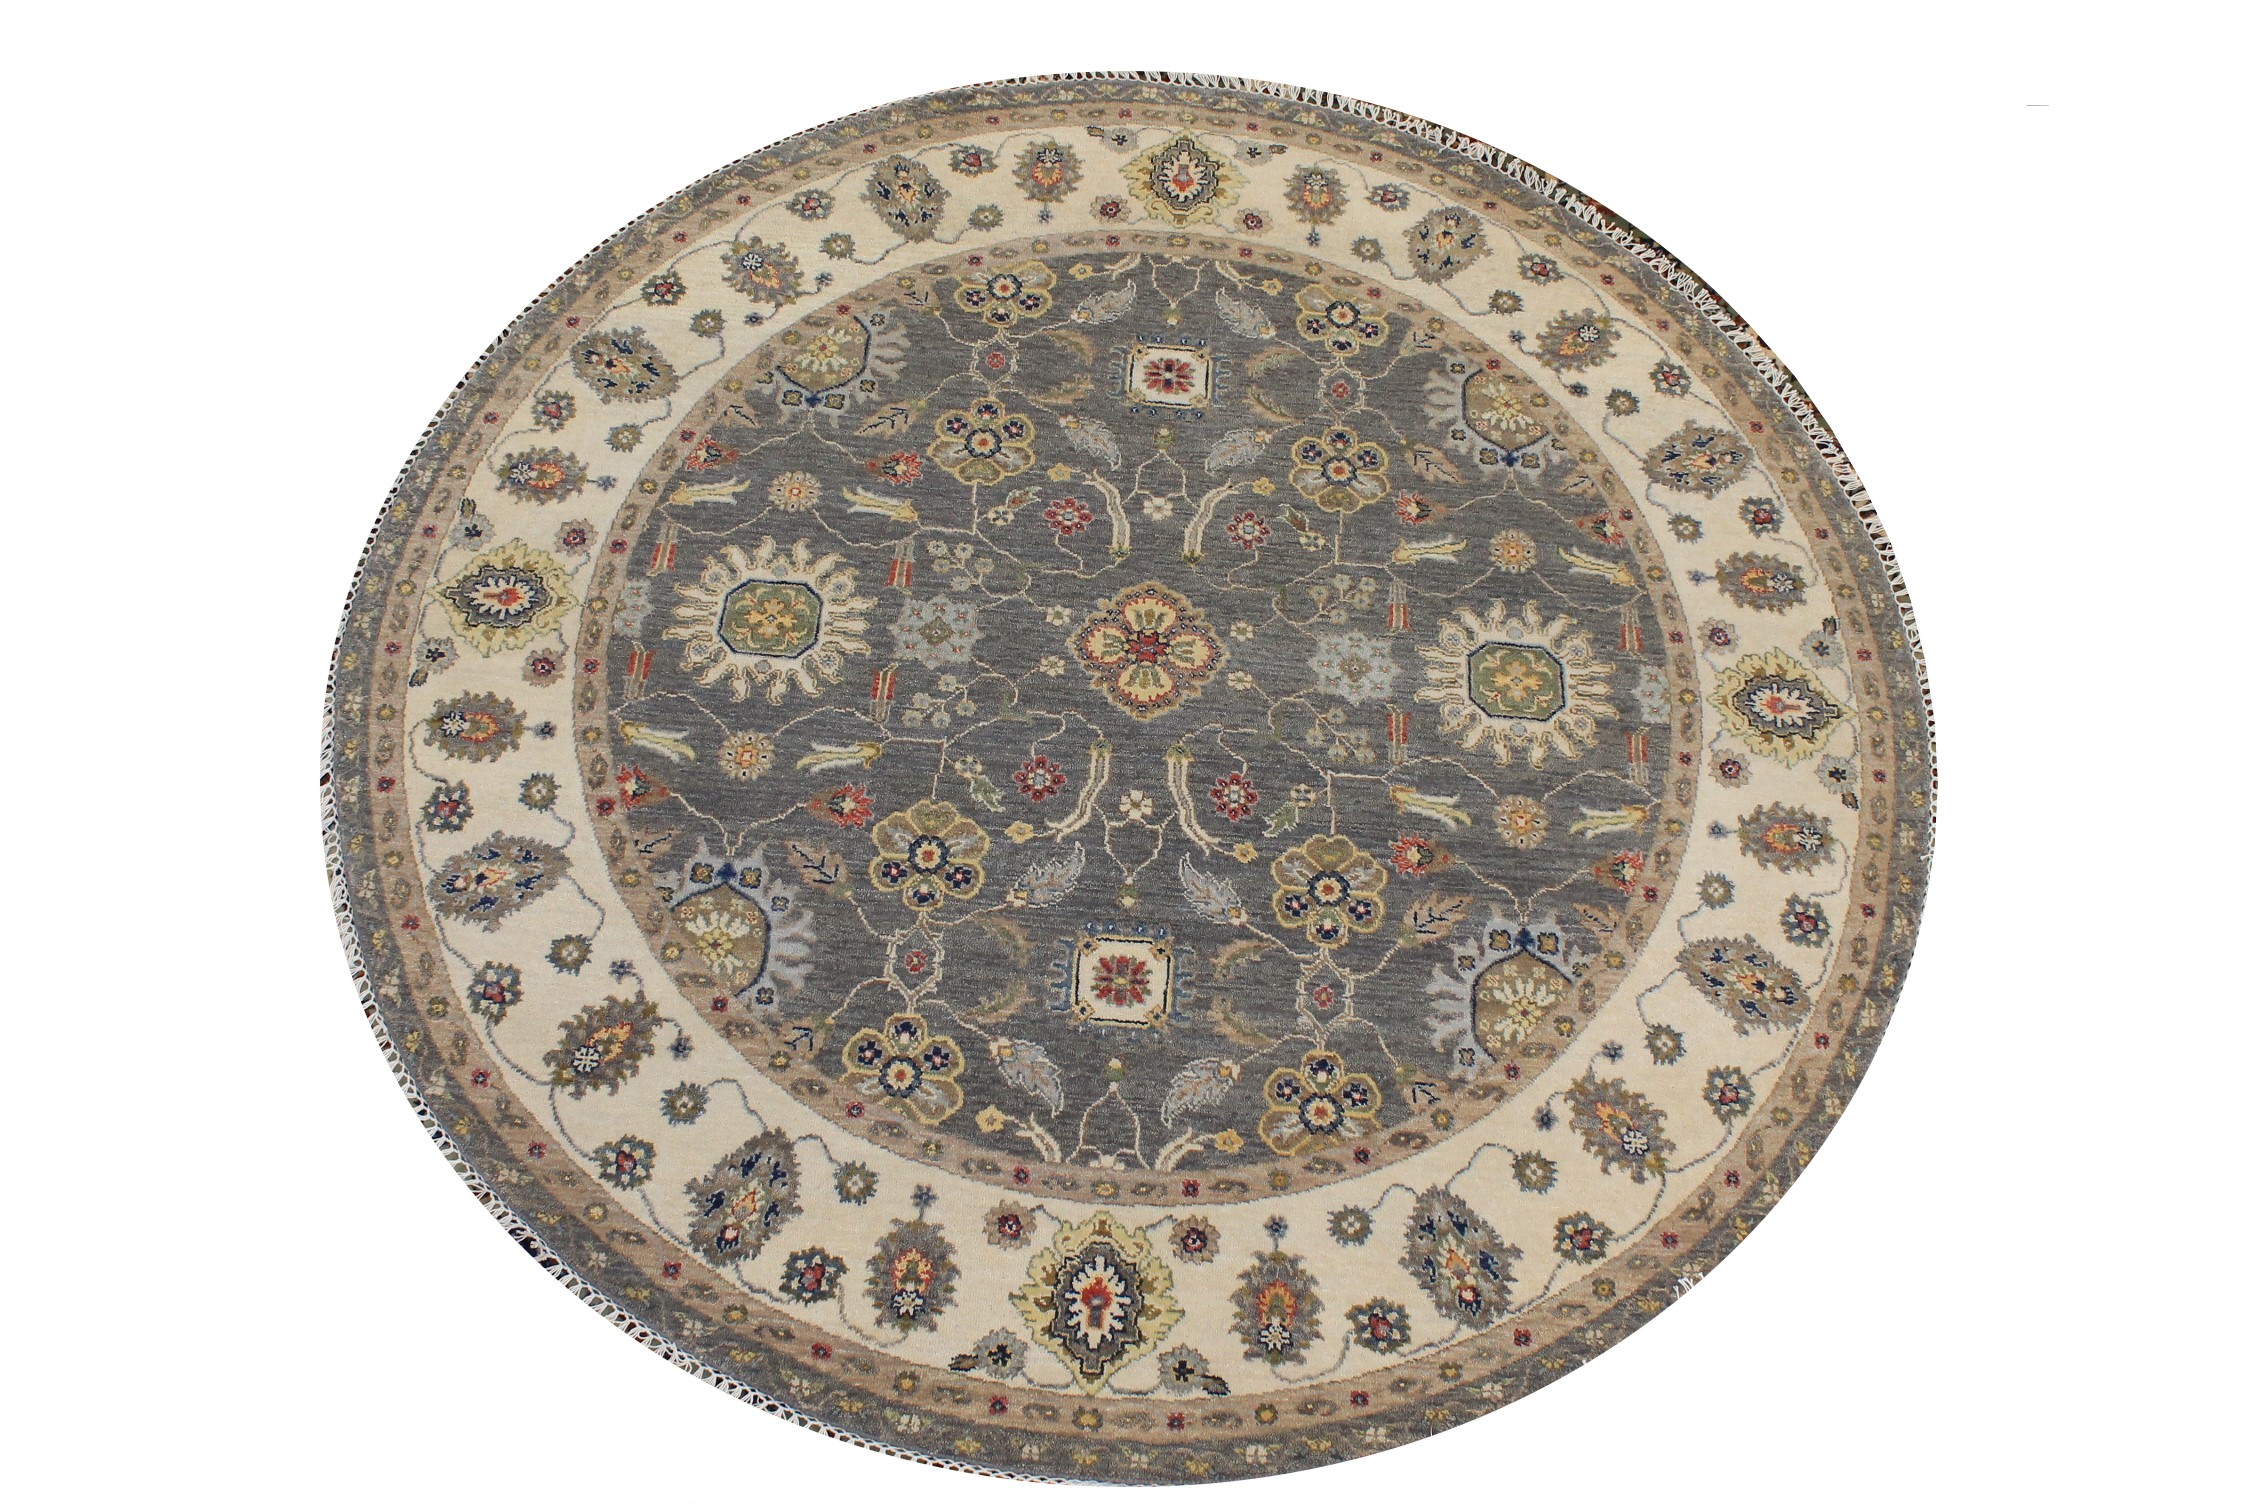 6 ft. - 7 ft. Round & Square Traditional Hand Knotted Wool Area Rug - MR025823